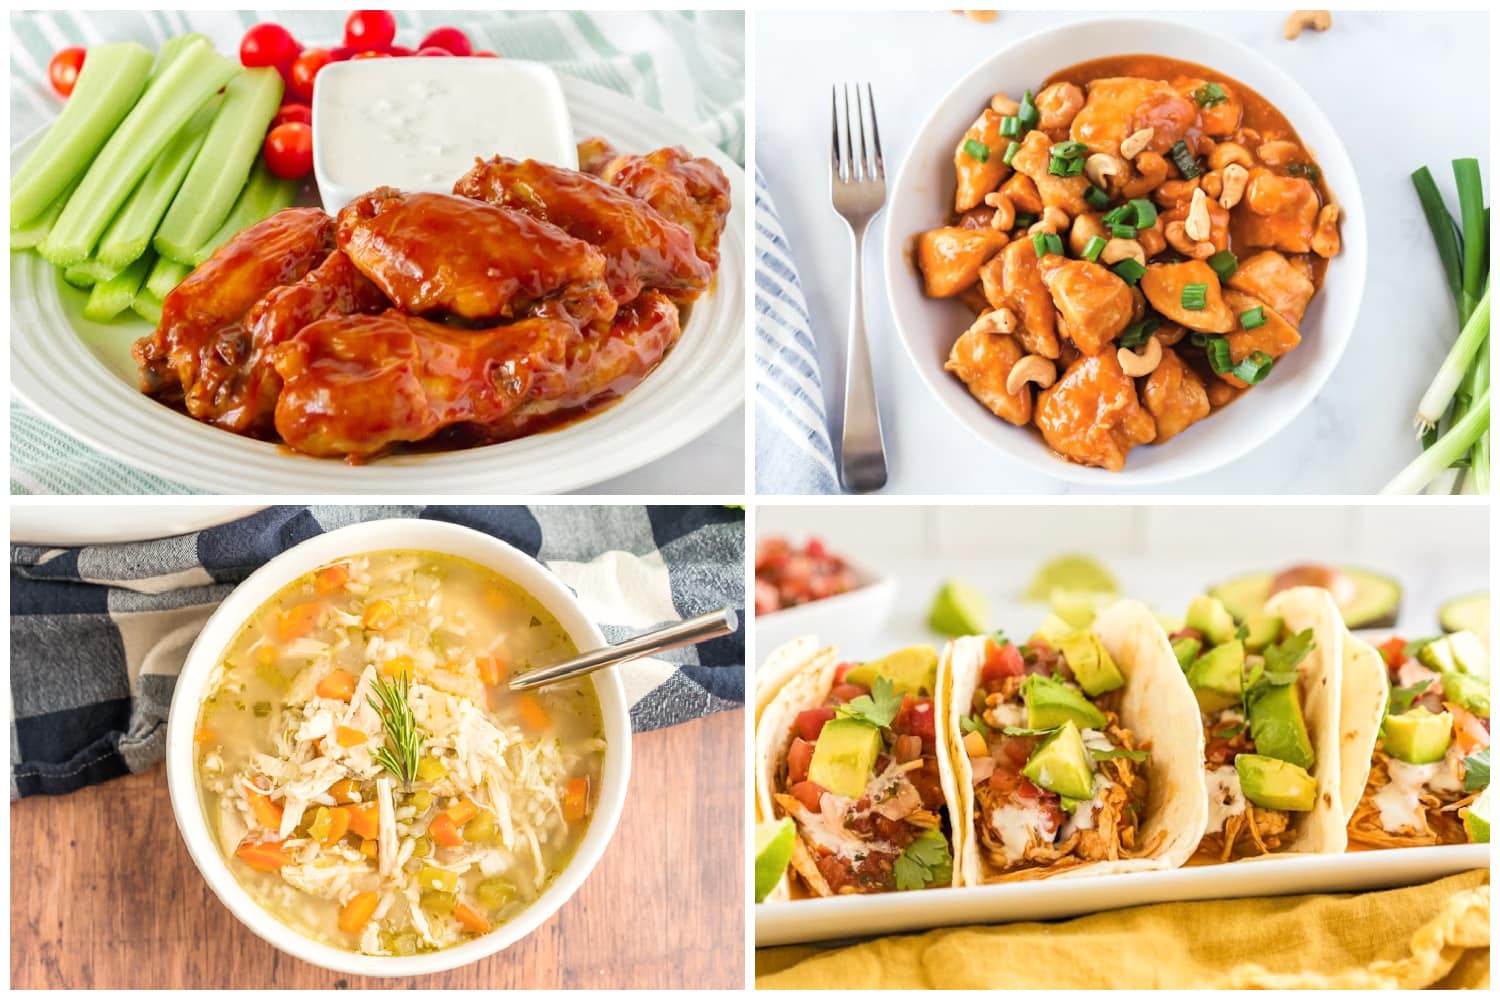 Collage of Crockpot Chicken recipes including hot wings, chicken tacos, chicken and rice soup, and cashew chicken.